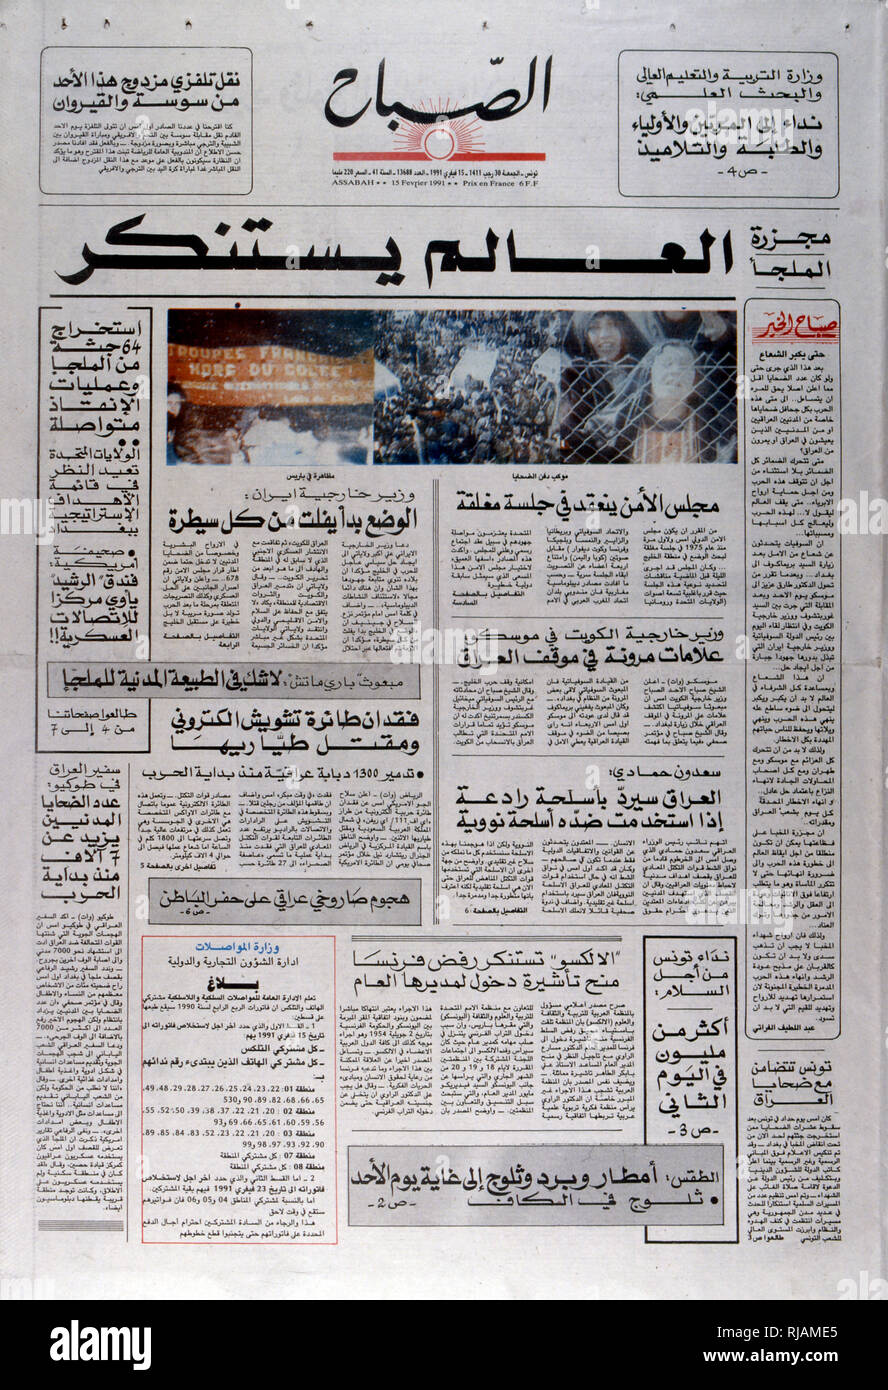 Headline of an Egyptian newspaper reporting on the Gulf War; February 1991.  The Gulf War (2 August 1990 - 28 February 1991), codenamed Operation Desert Shield and Operation Desert Storm, was a war waged by coalition forces from 35 nations led by the United States against Iraq in response to Iraq's invasion and annexation of Kuwait. Stock Photo